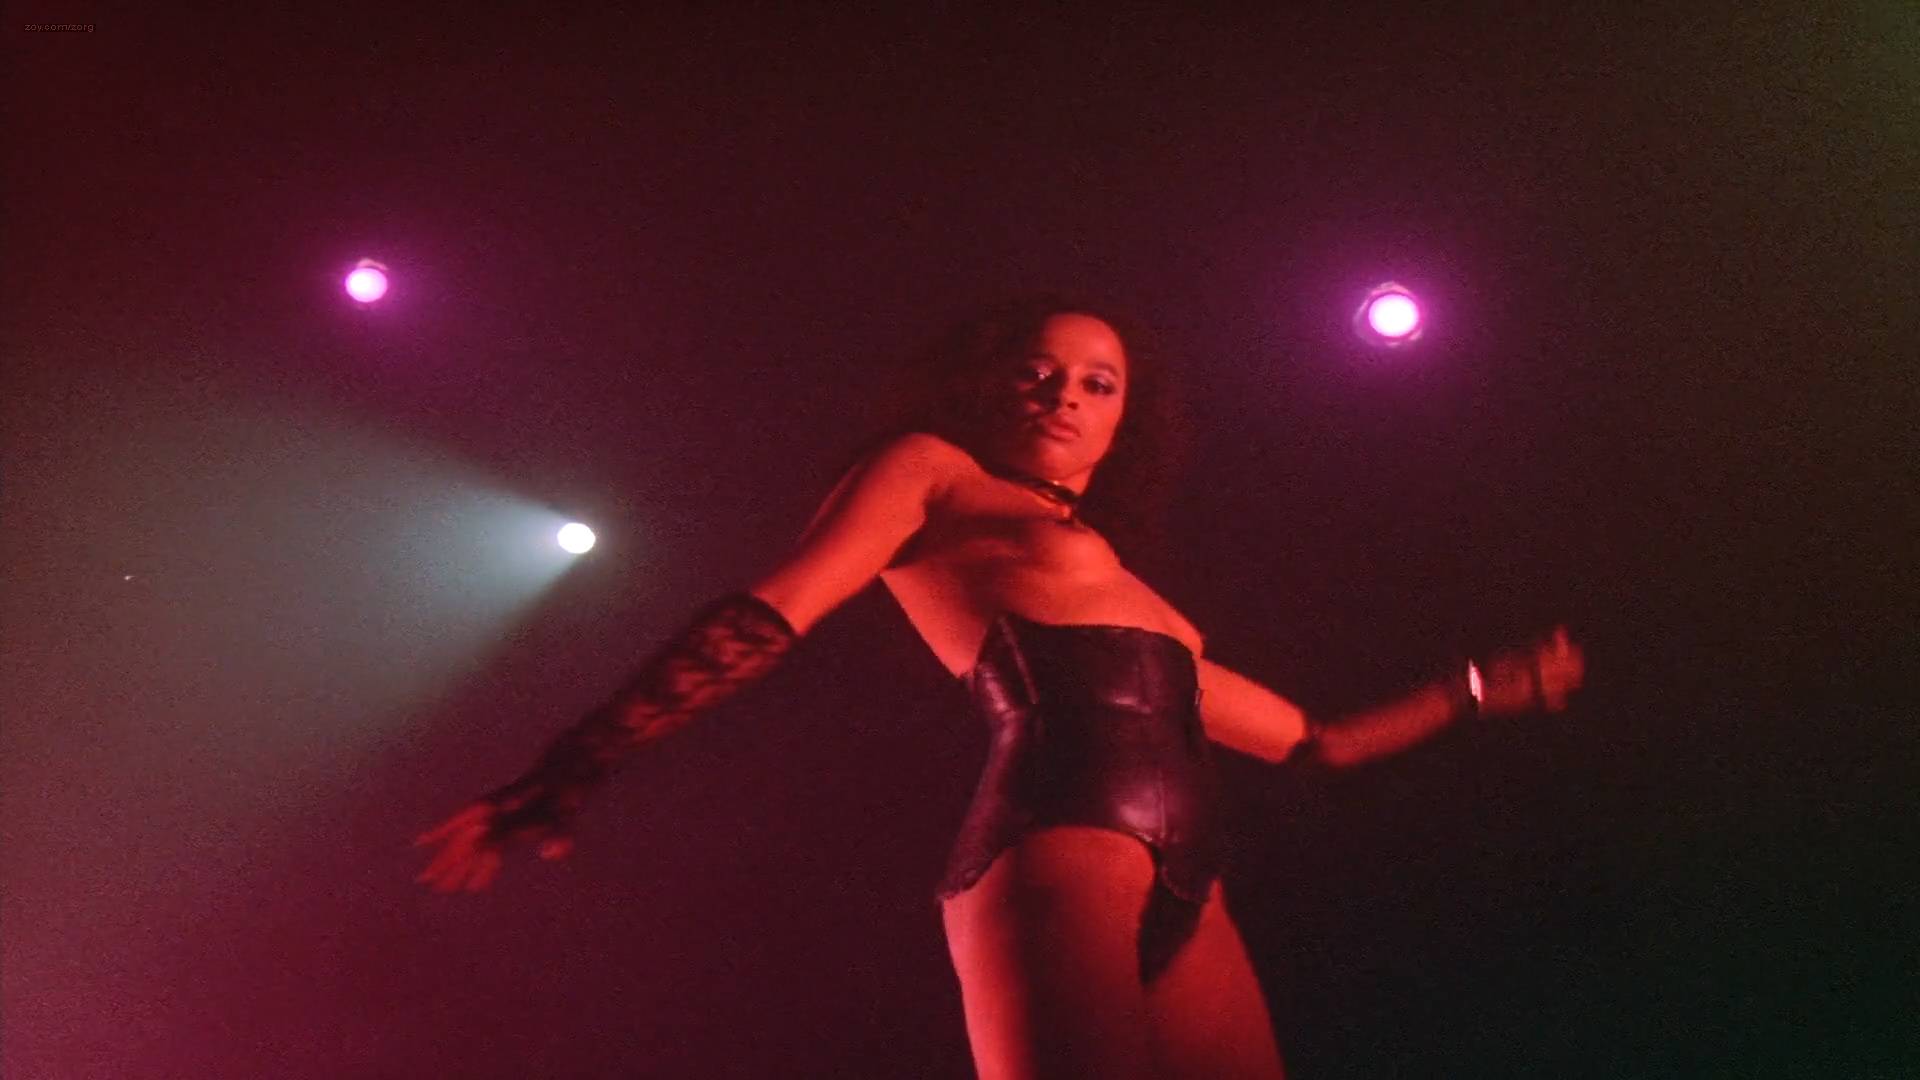 Melanie Griffith nude topless Rae Dawn Chong, Emilia Crow and other's nude - Fear City (1984) HD 1080p (8)